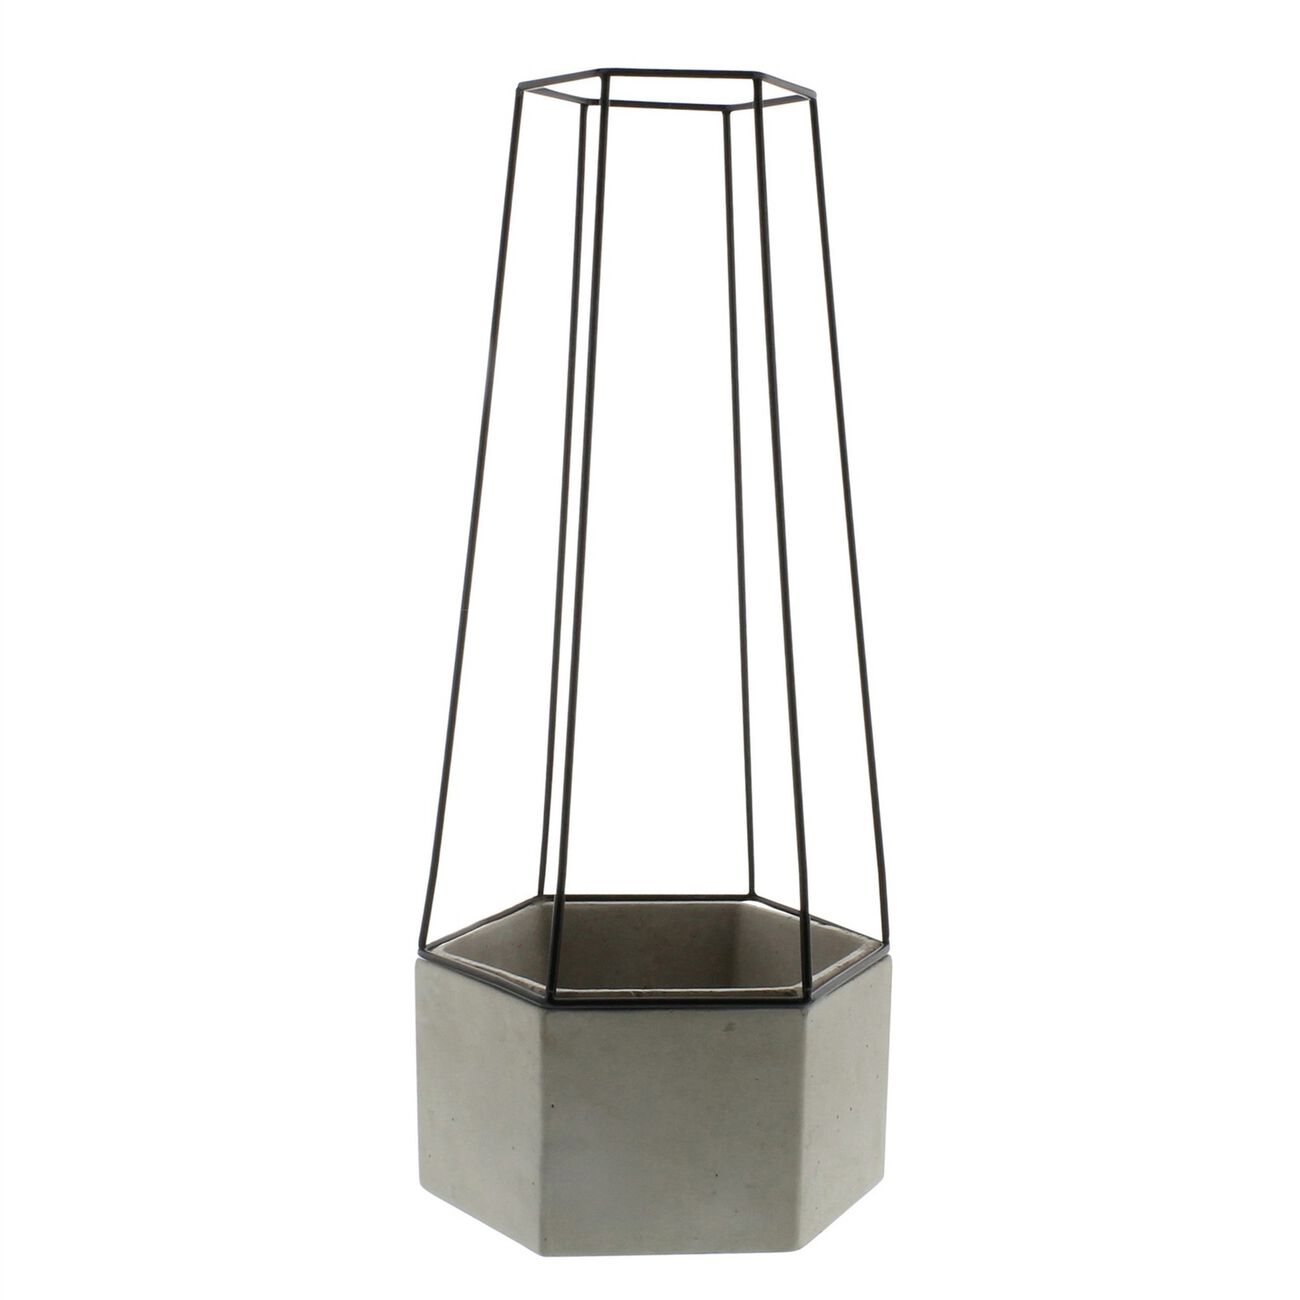 Hexagonal Cement Planter with Metal Cage, Large, Gray